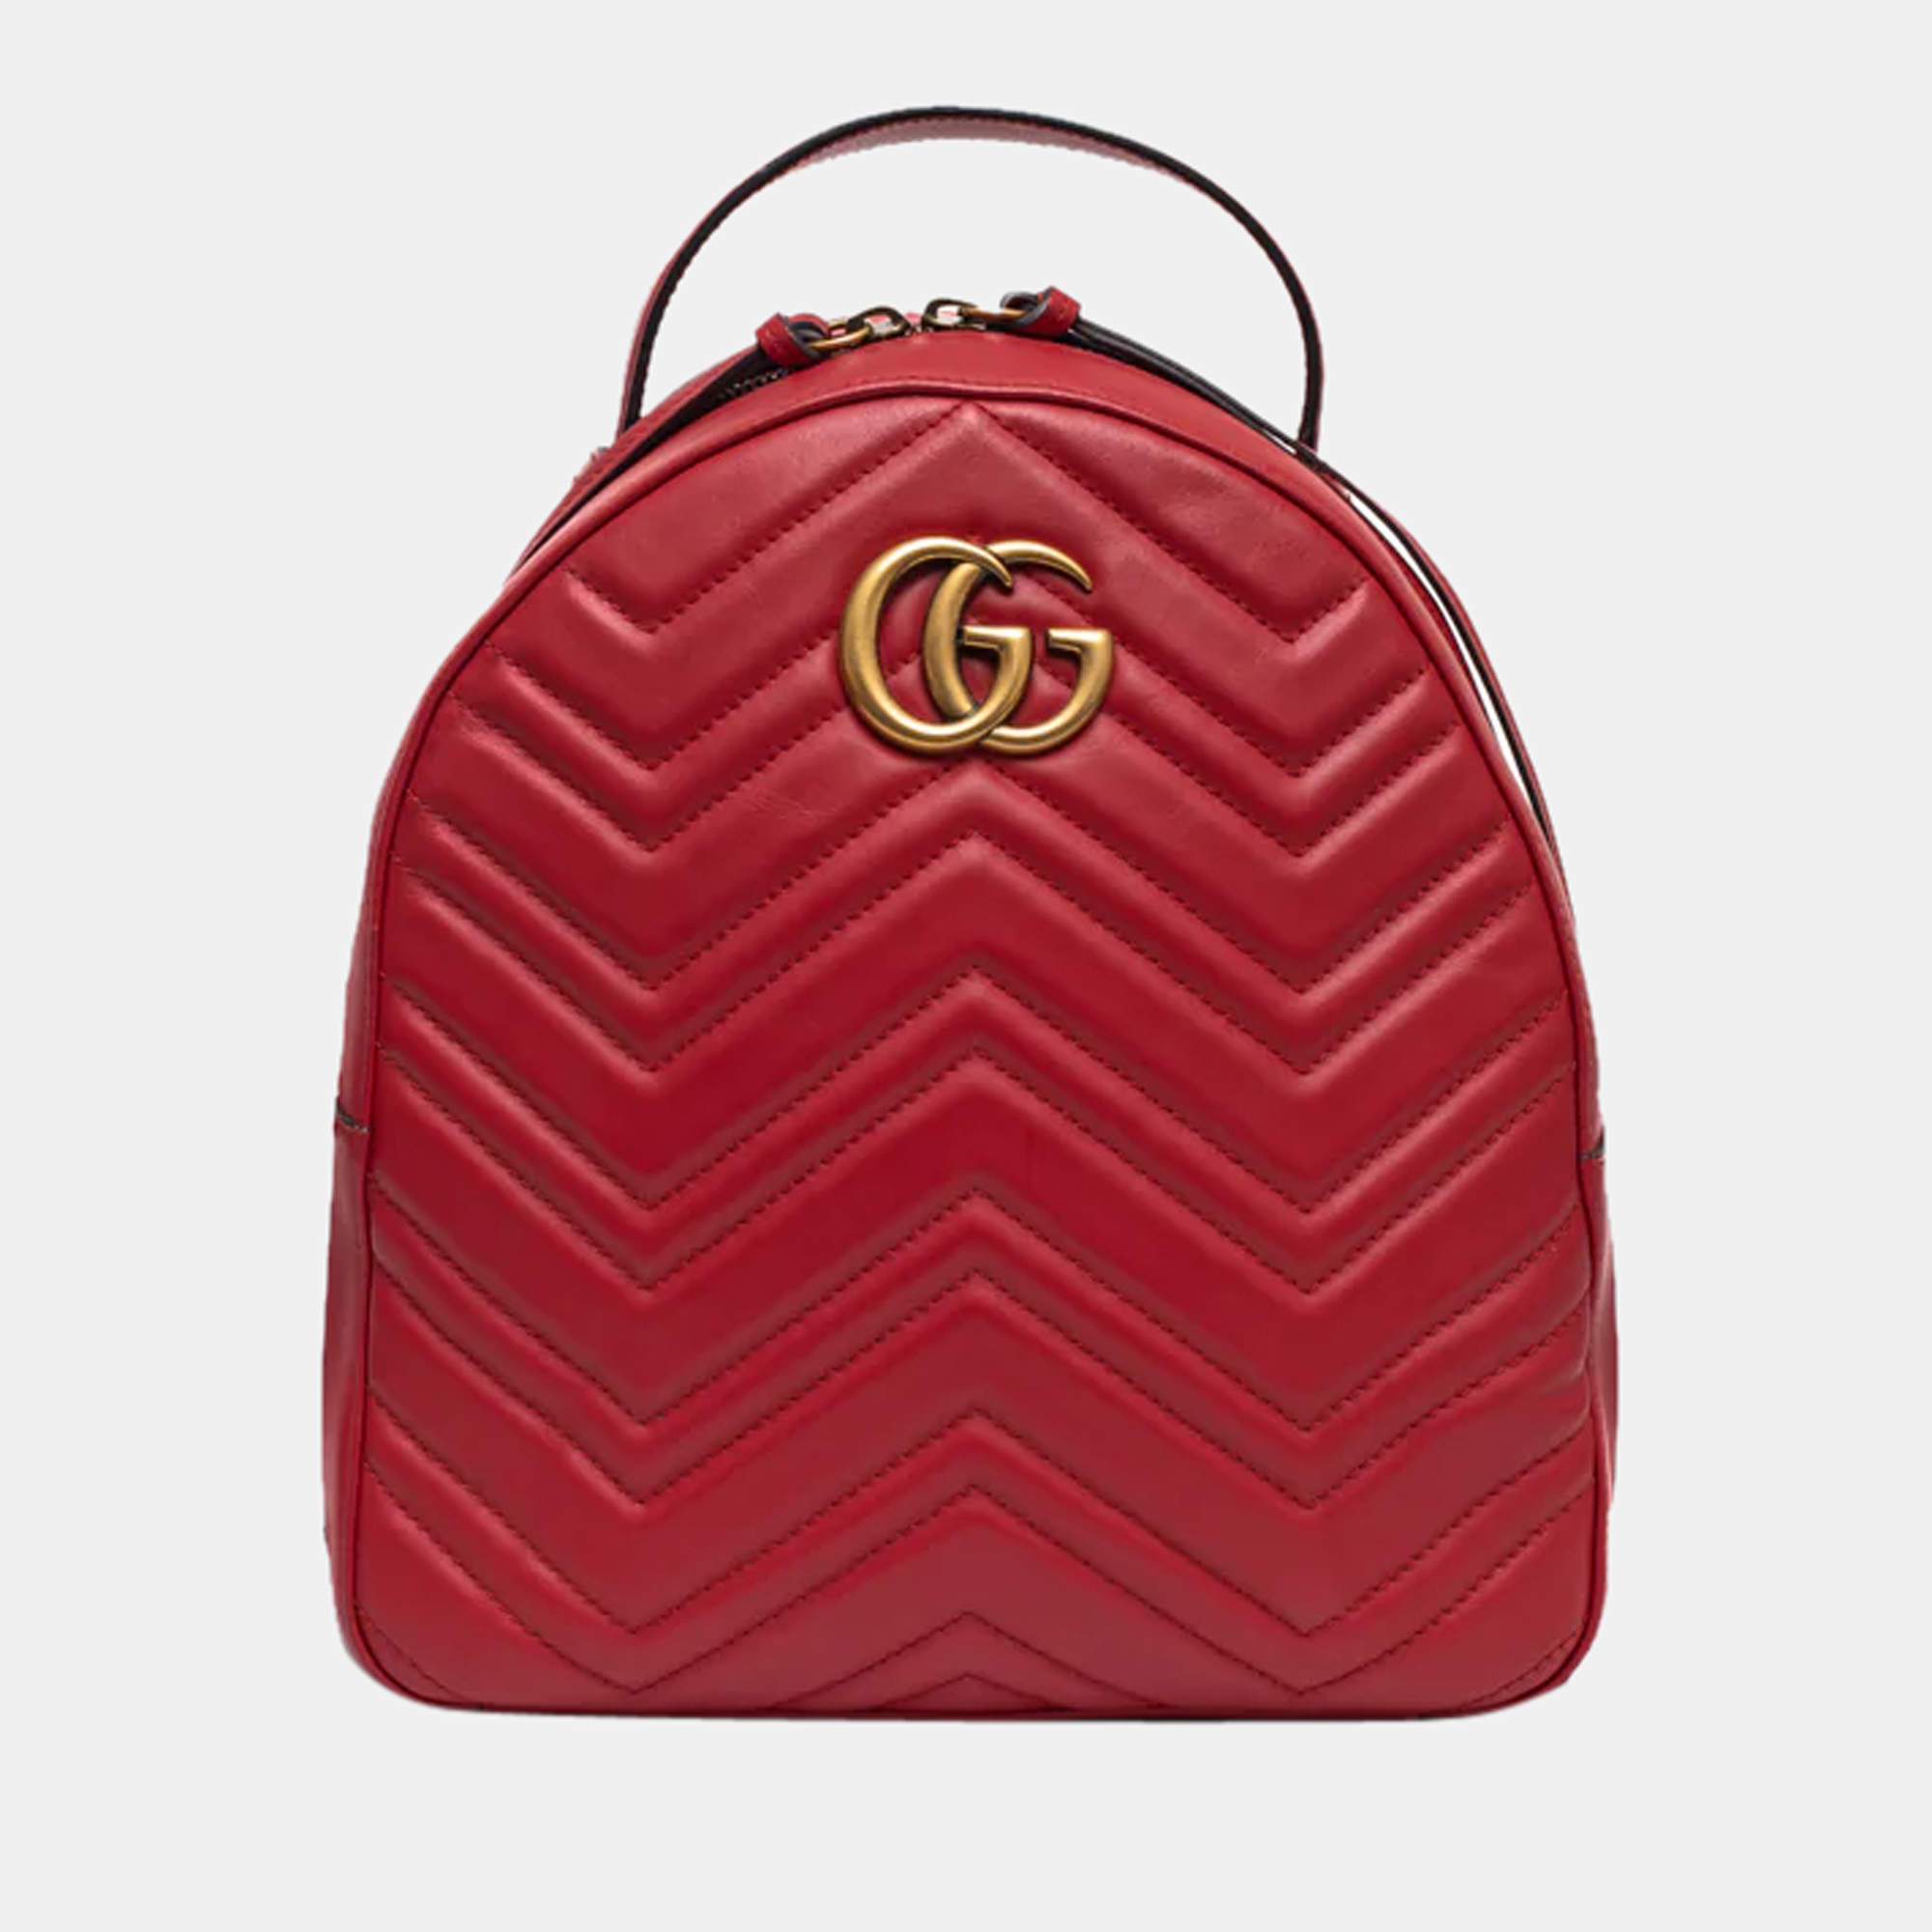 Resale Gucci GG Marmont Leather Mini Backpack